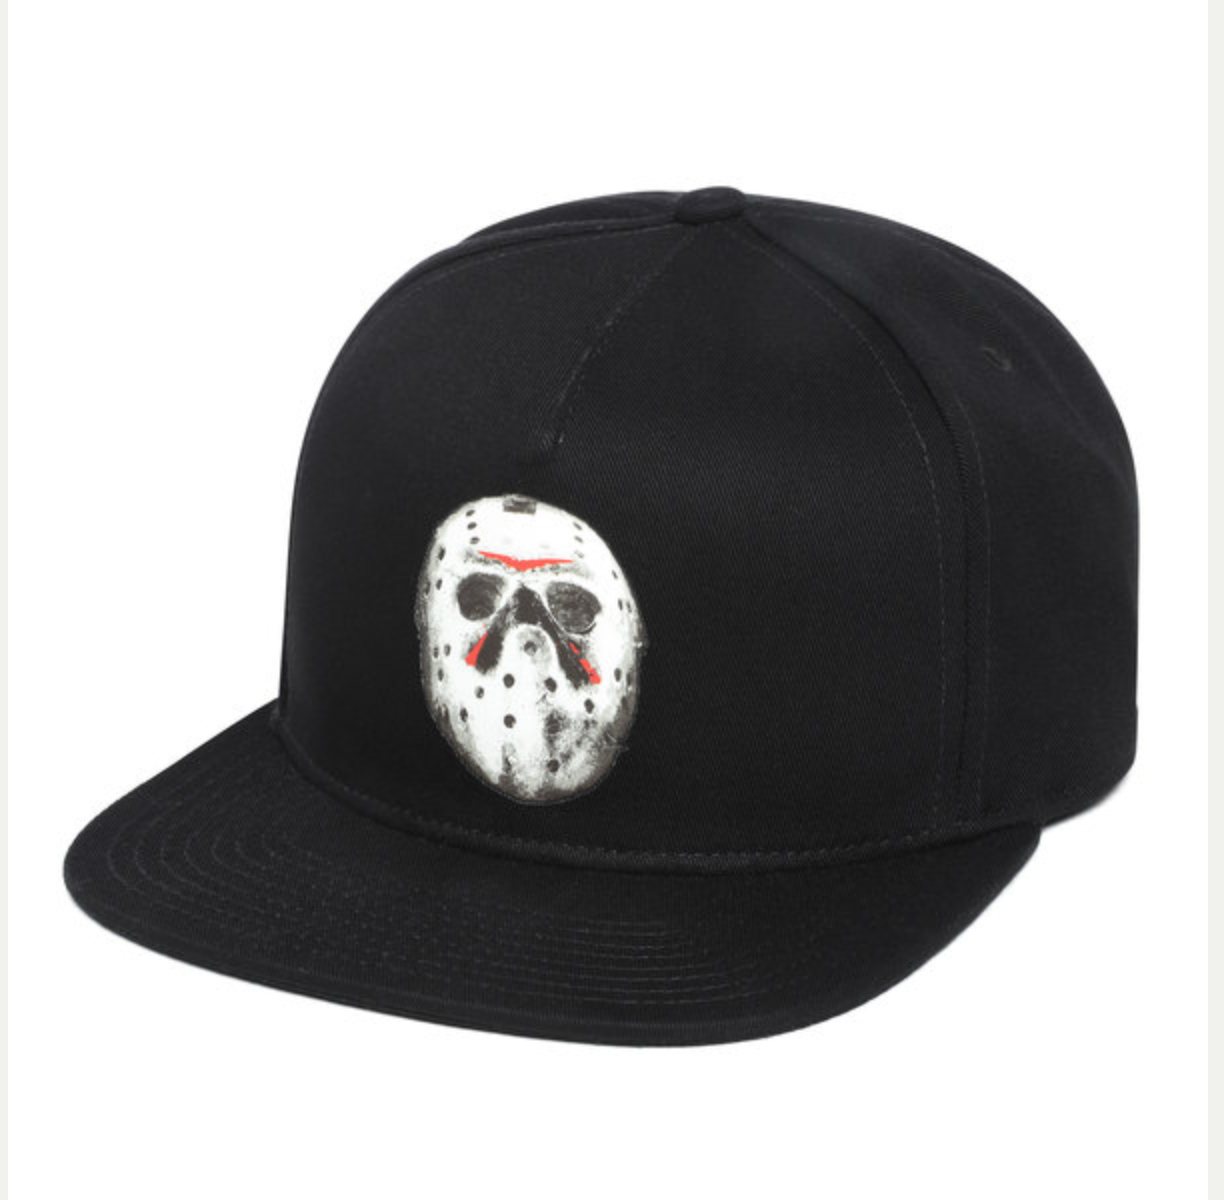 Vans X Friday The 13th Hat